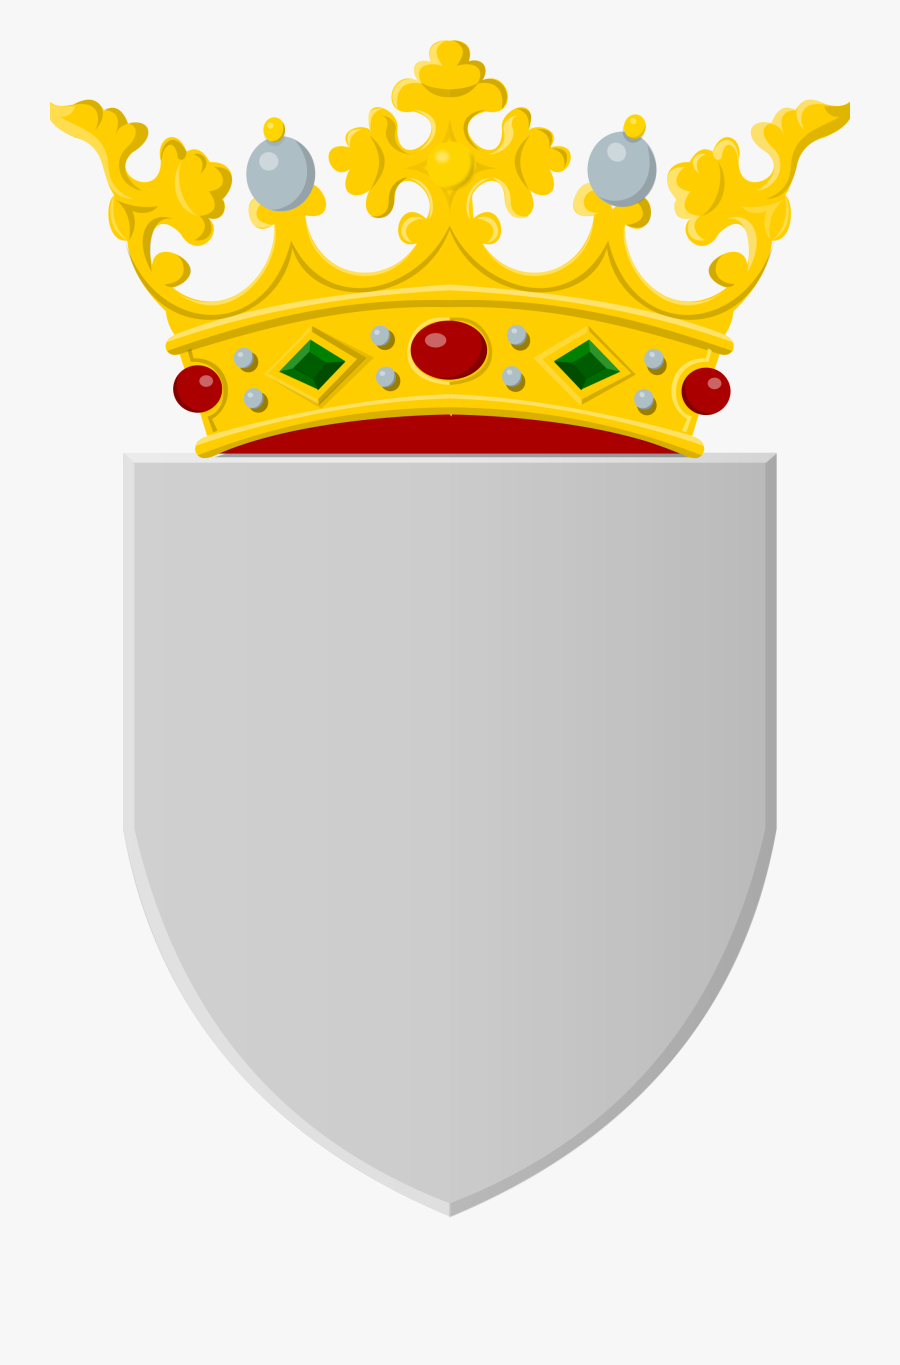 Silver Shield With Golden Crown - Crown Shield, Transparent Clipart